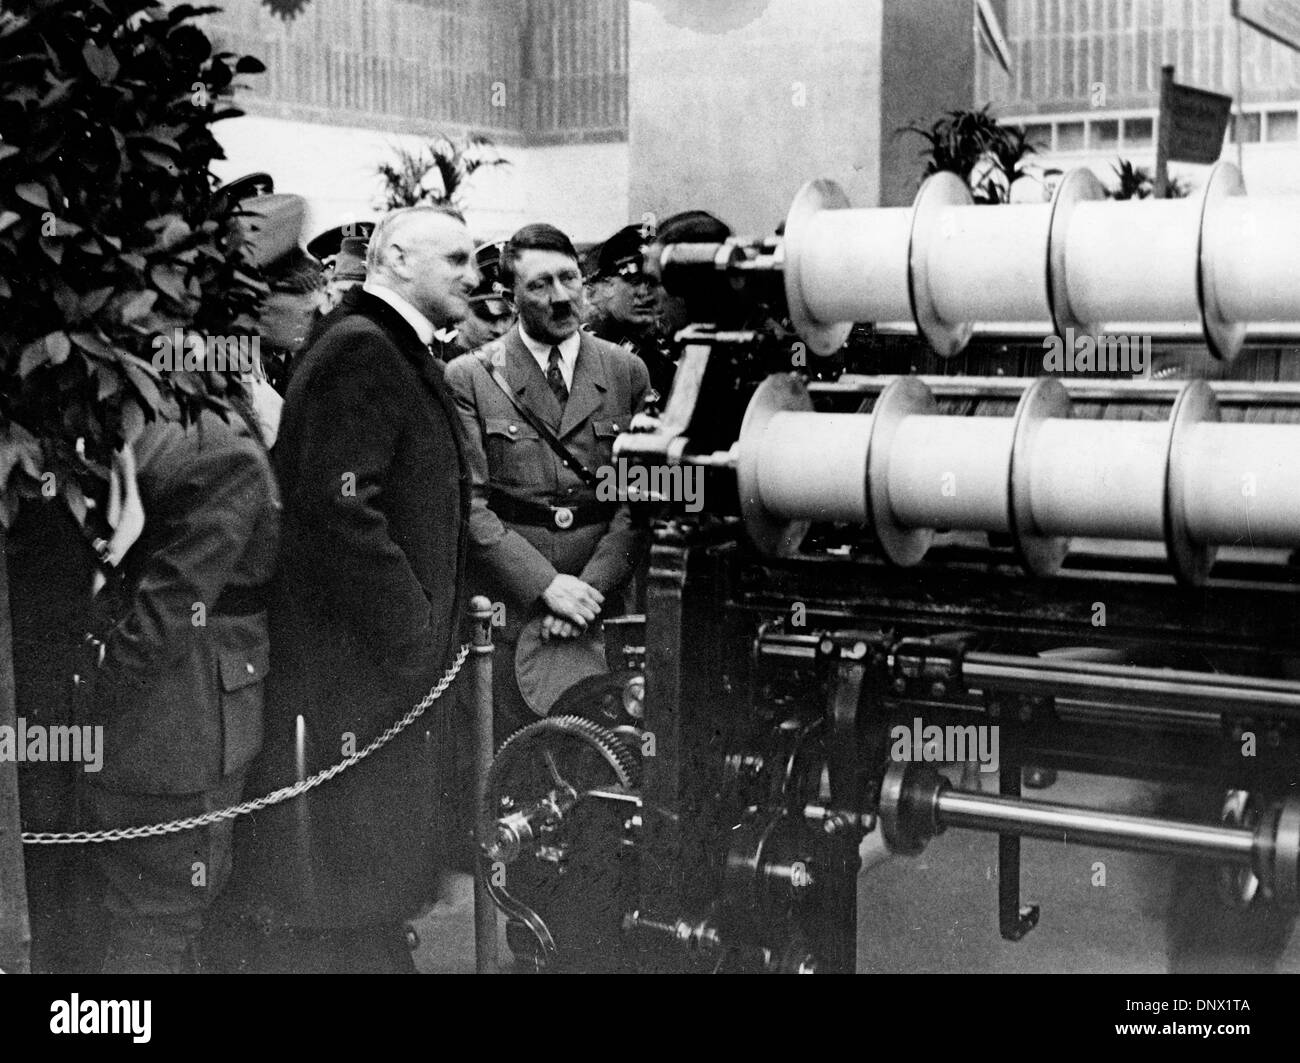 March 7, 1934 - Leipzig, Germany - Nazi leader and Fuhrer of Germany, ADOLF HITLER inspects a weaving machine at the Leipzig Fair in 1934. (Credit Image: © KEYSTONE Pictures USA/ZUMAPRESS.com) Stock Photo